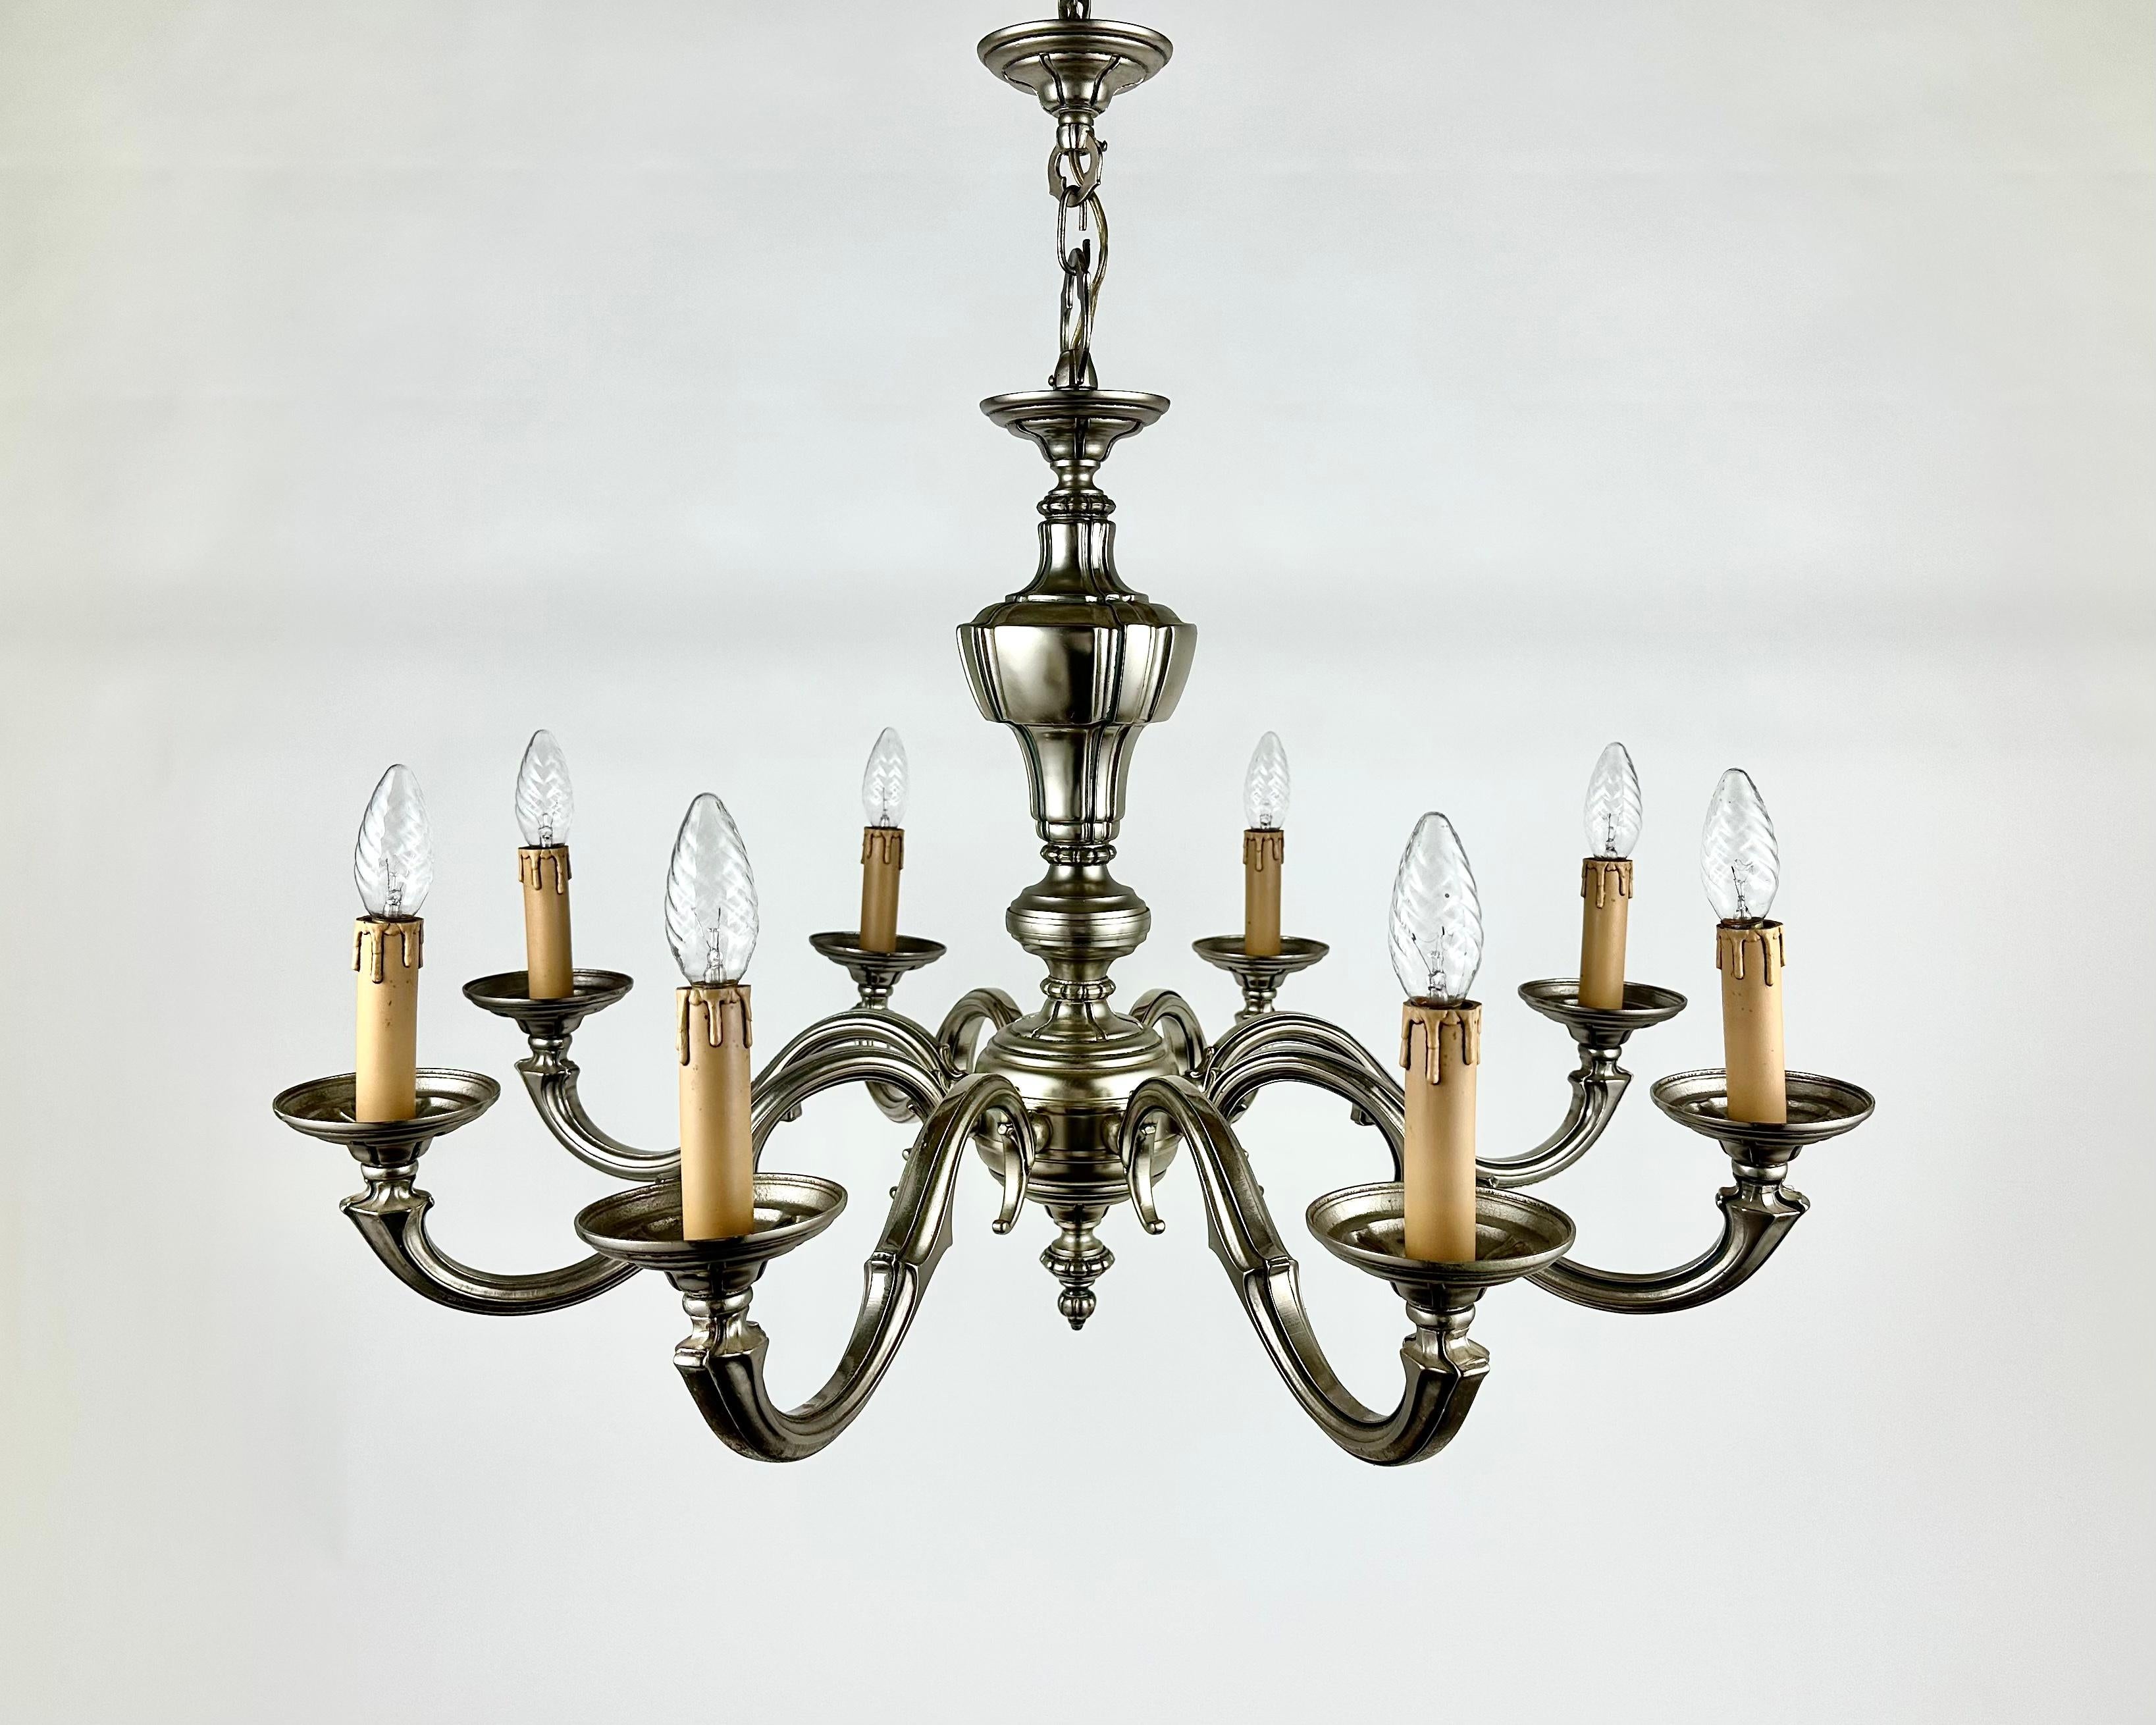 Amazing Vintage Bronze Chandelier For 8 Light Bulbs, Belgium 1970s  In Excellent Condition For Sale In Bastogne, BE